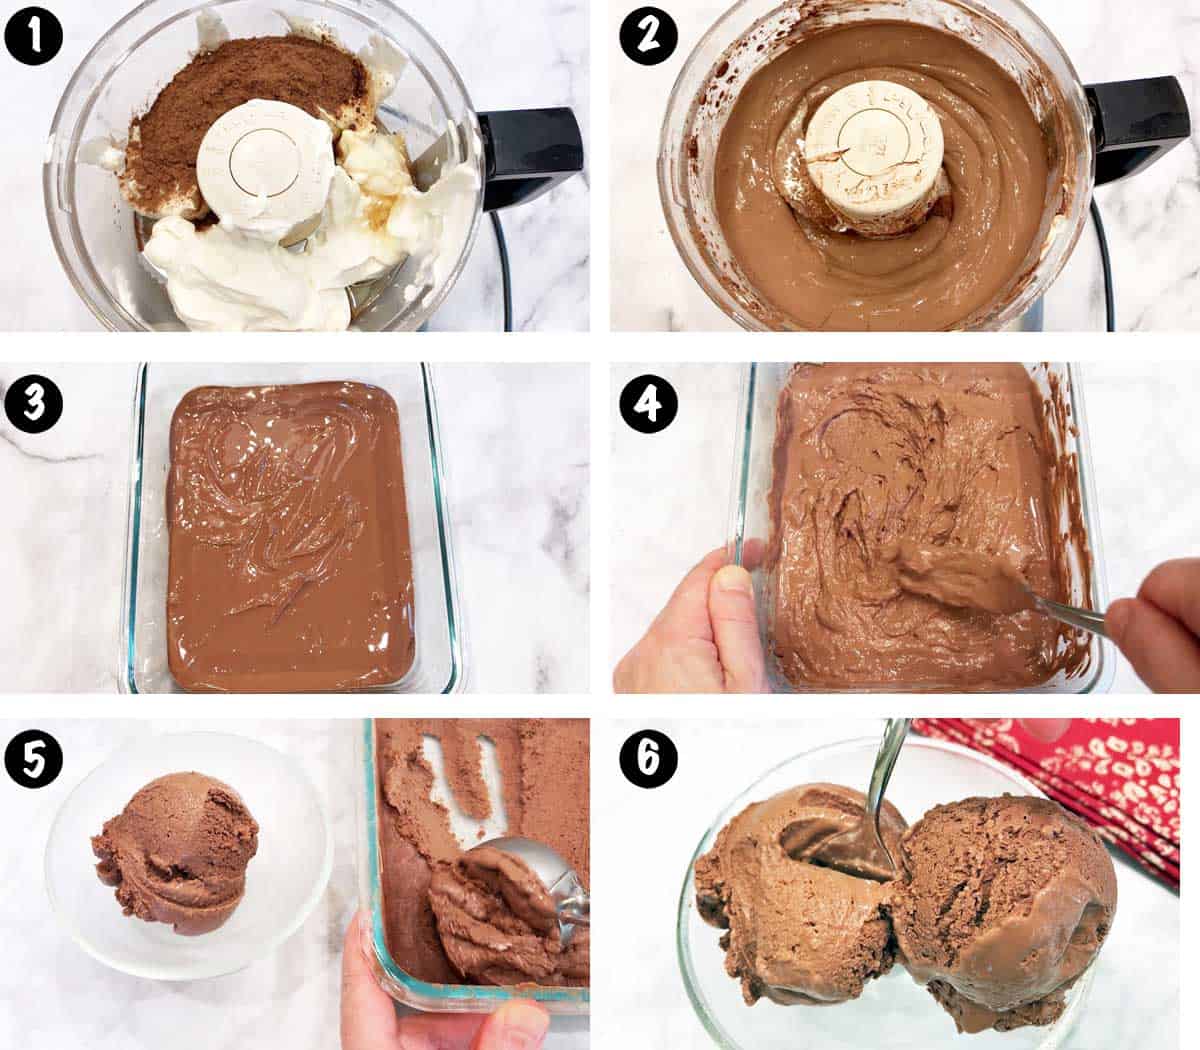 A six-photo collage showing the steps for making chocolate frozen yogurt. 